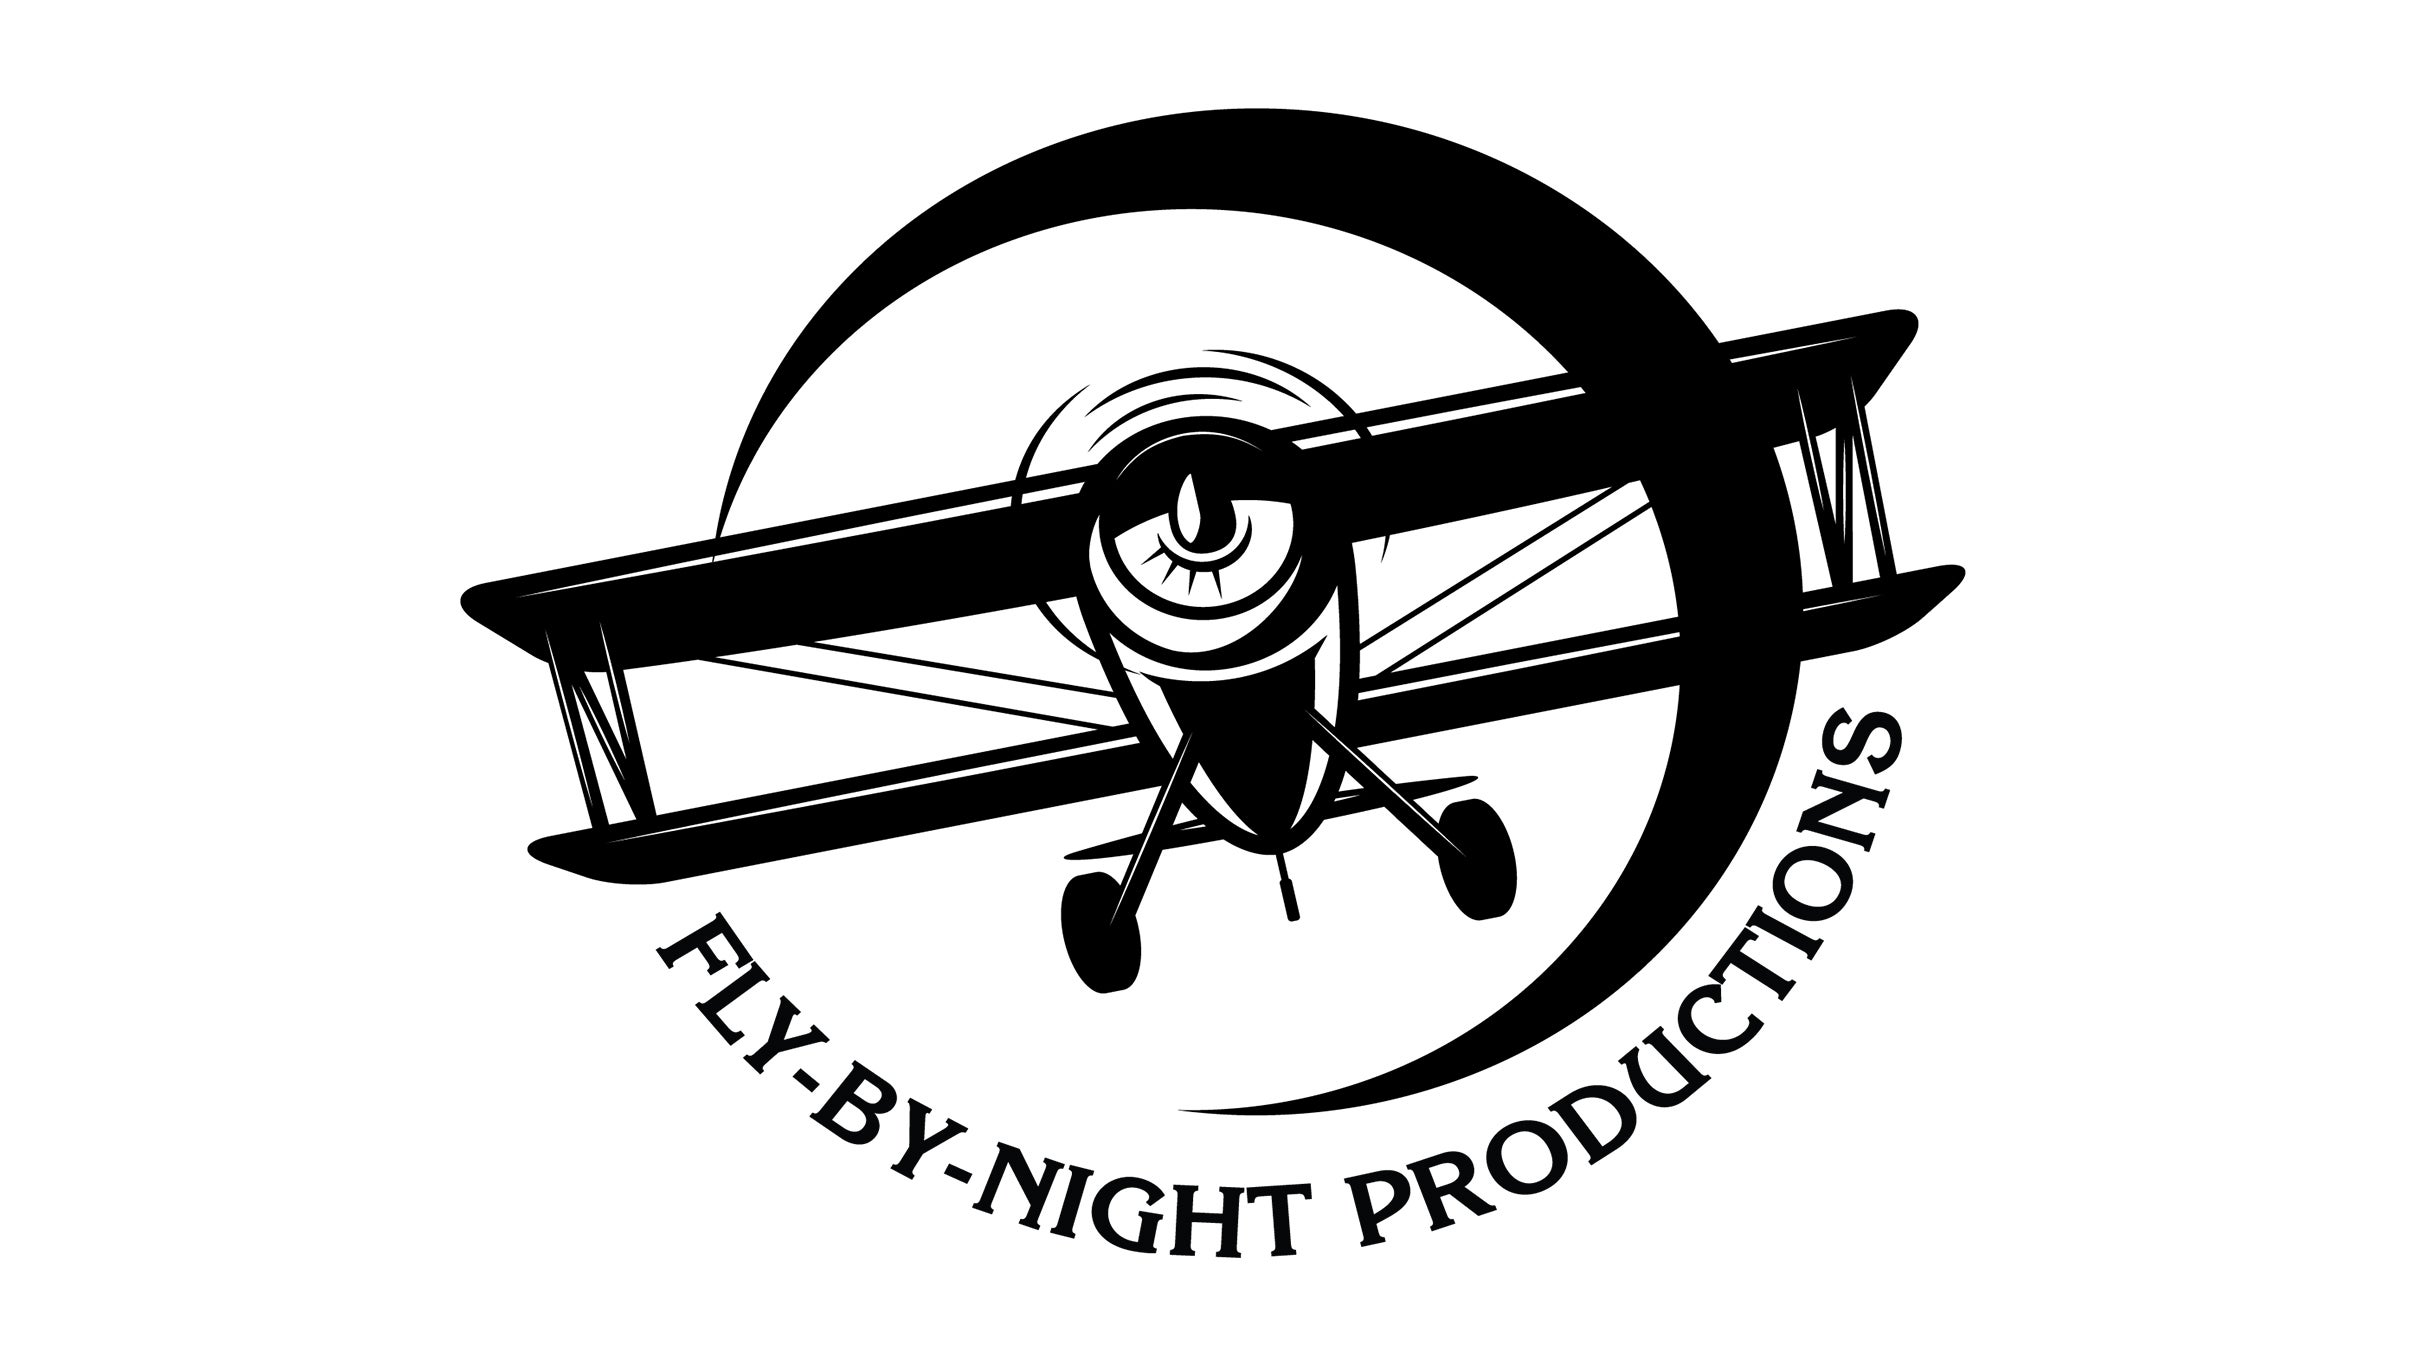 Fly-By-Night Productions: Terra Nova at Five Flags Center – Dubuque, IA